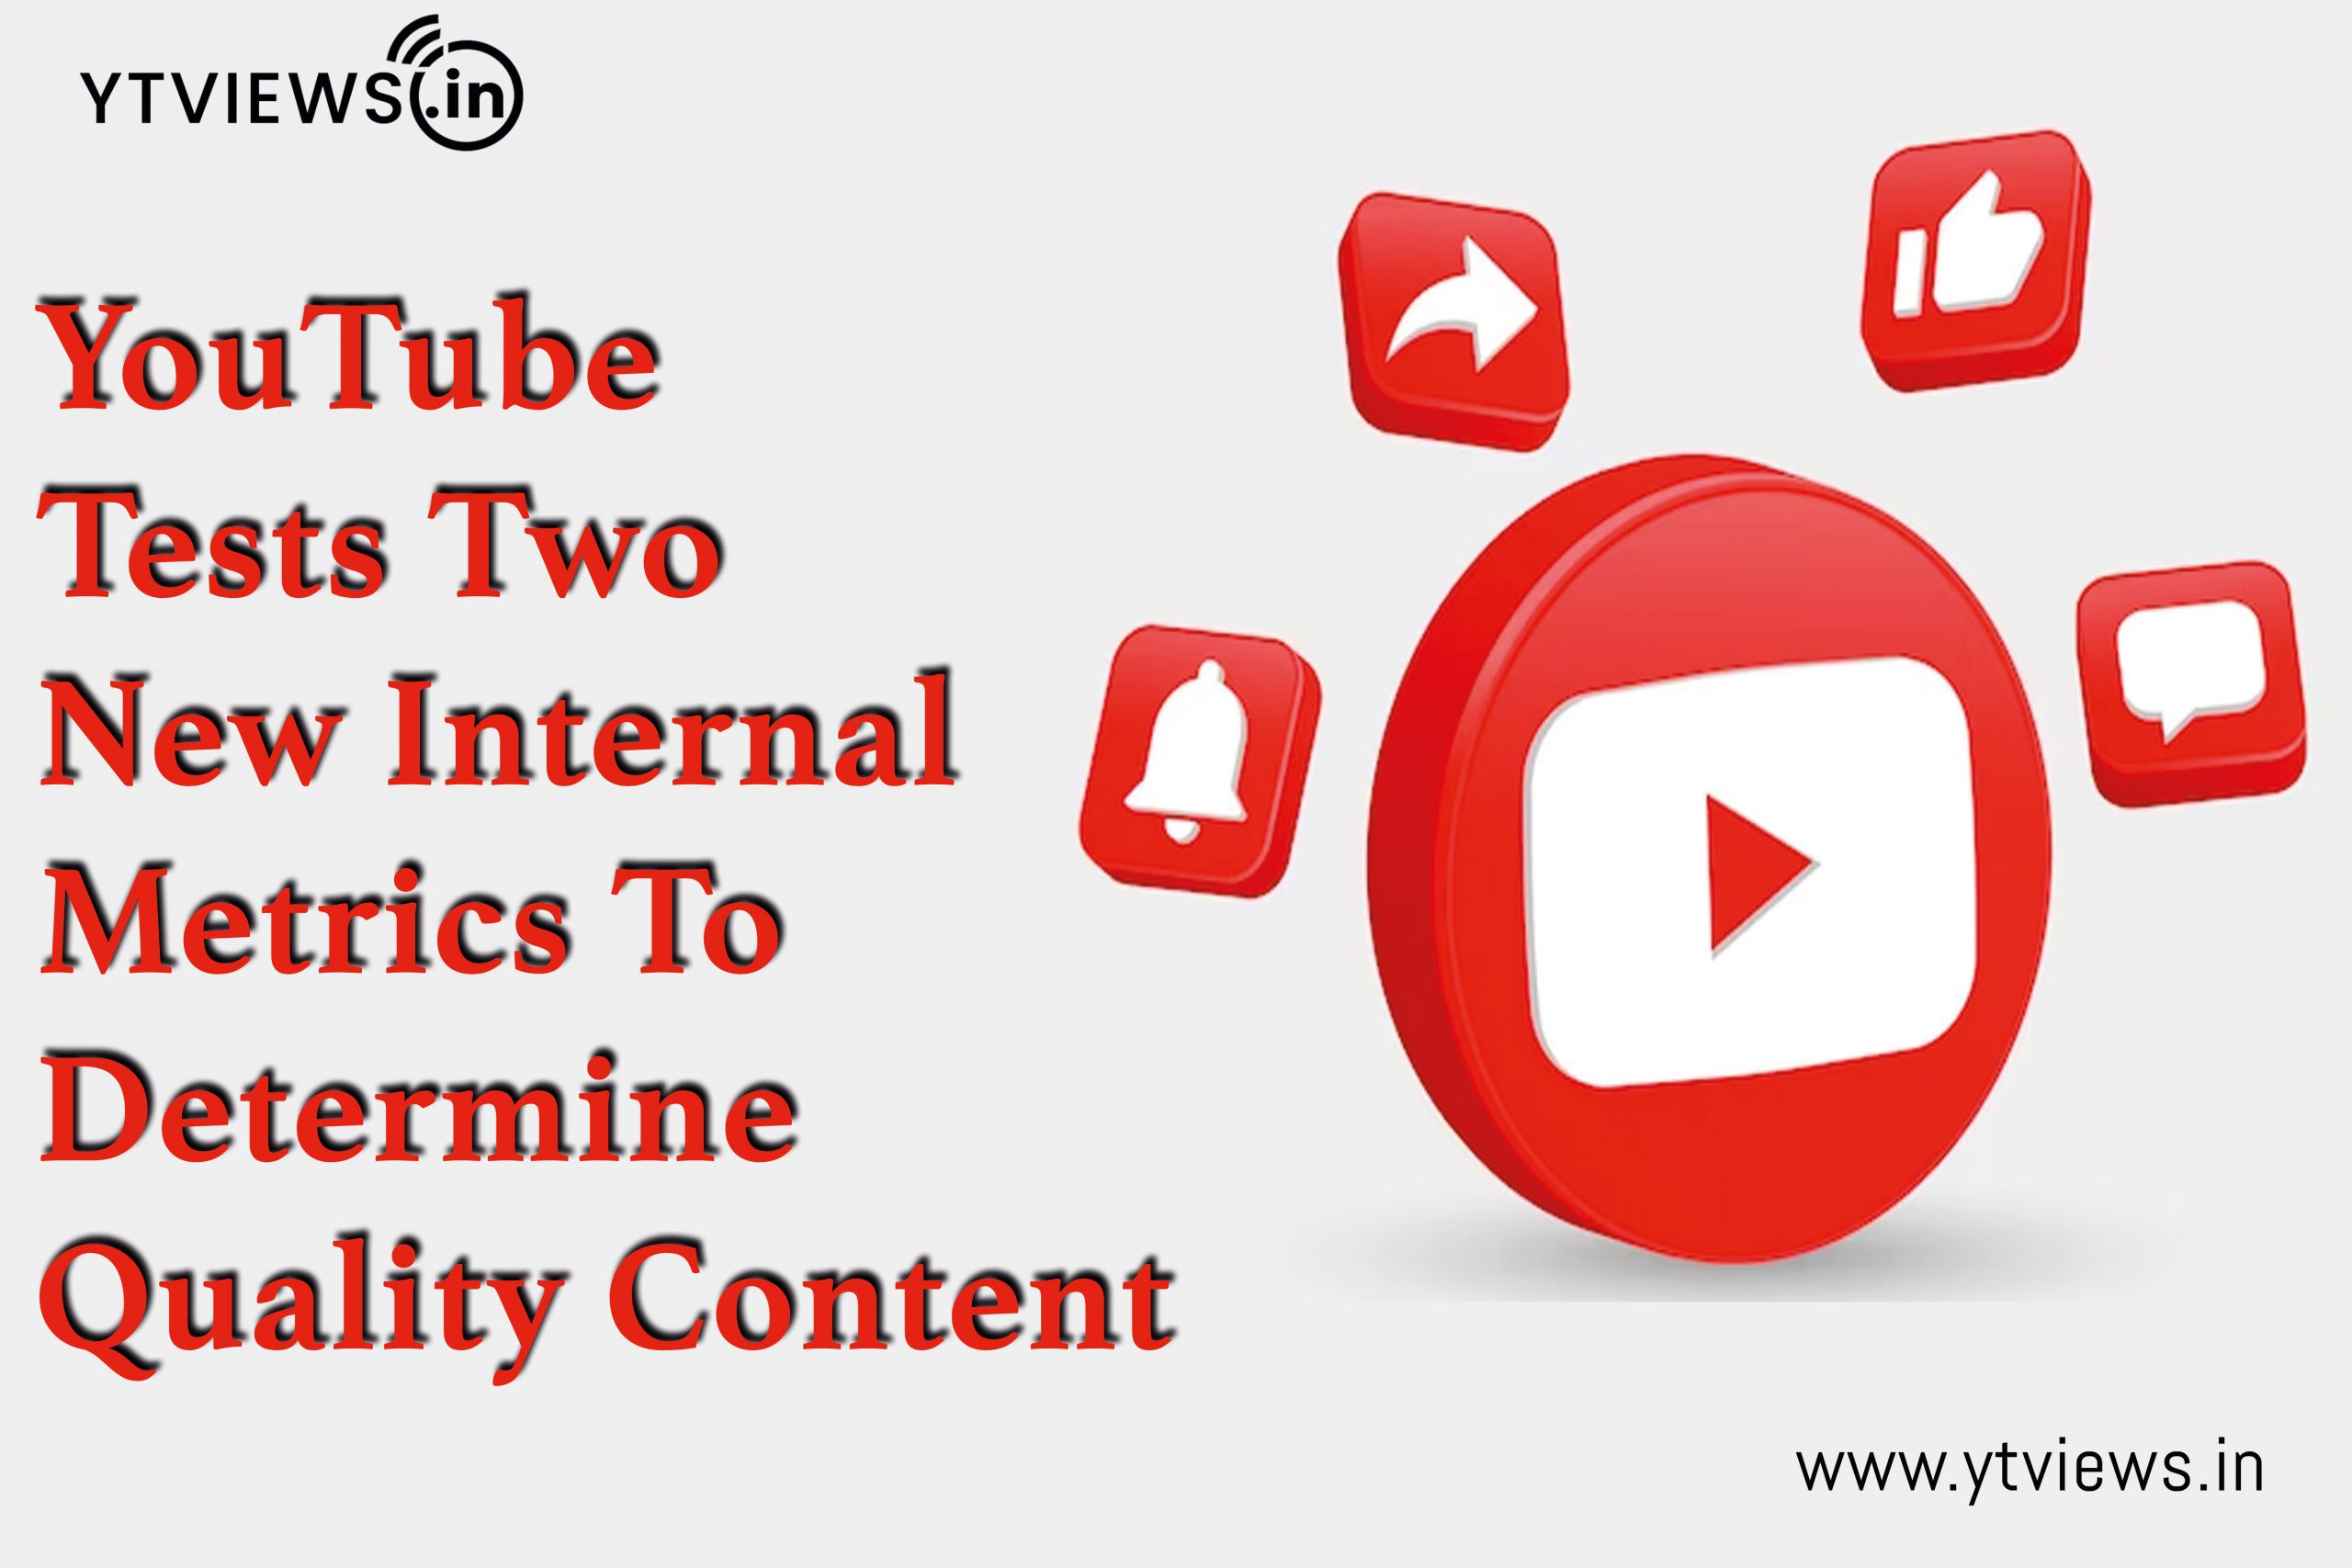 YouTube tests two new internal metrics to determine quality content